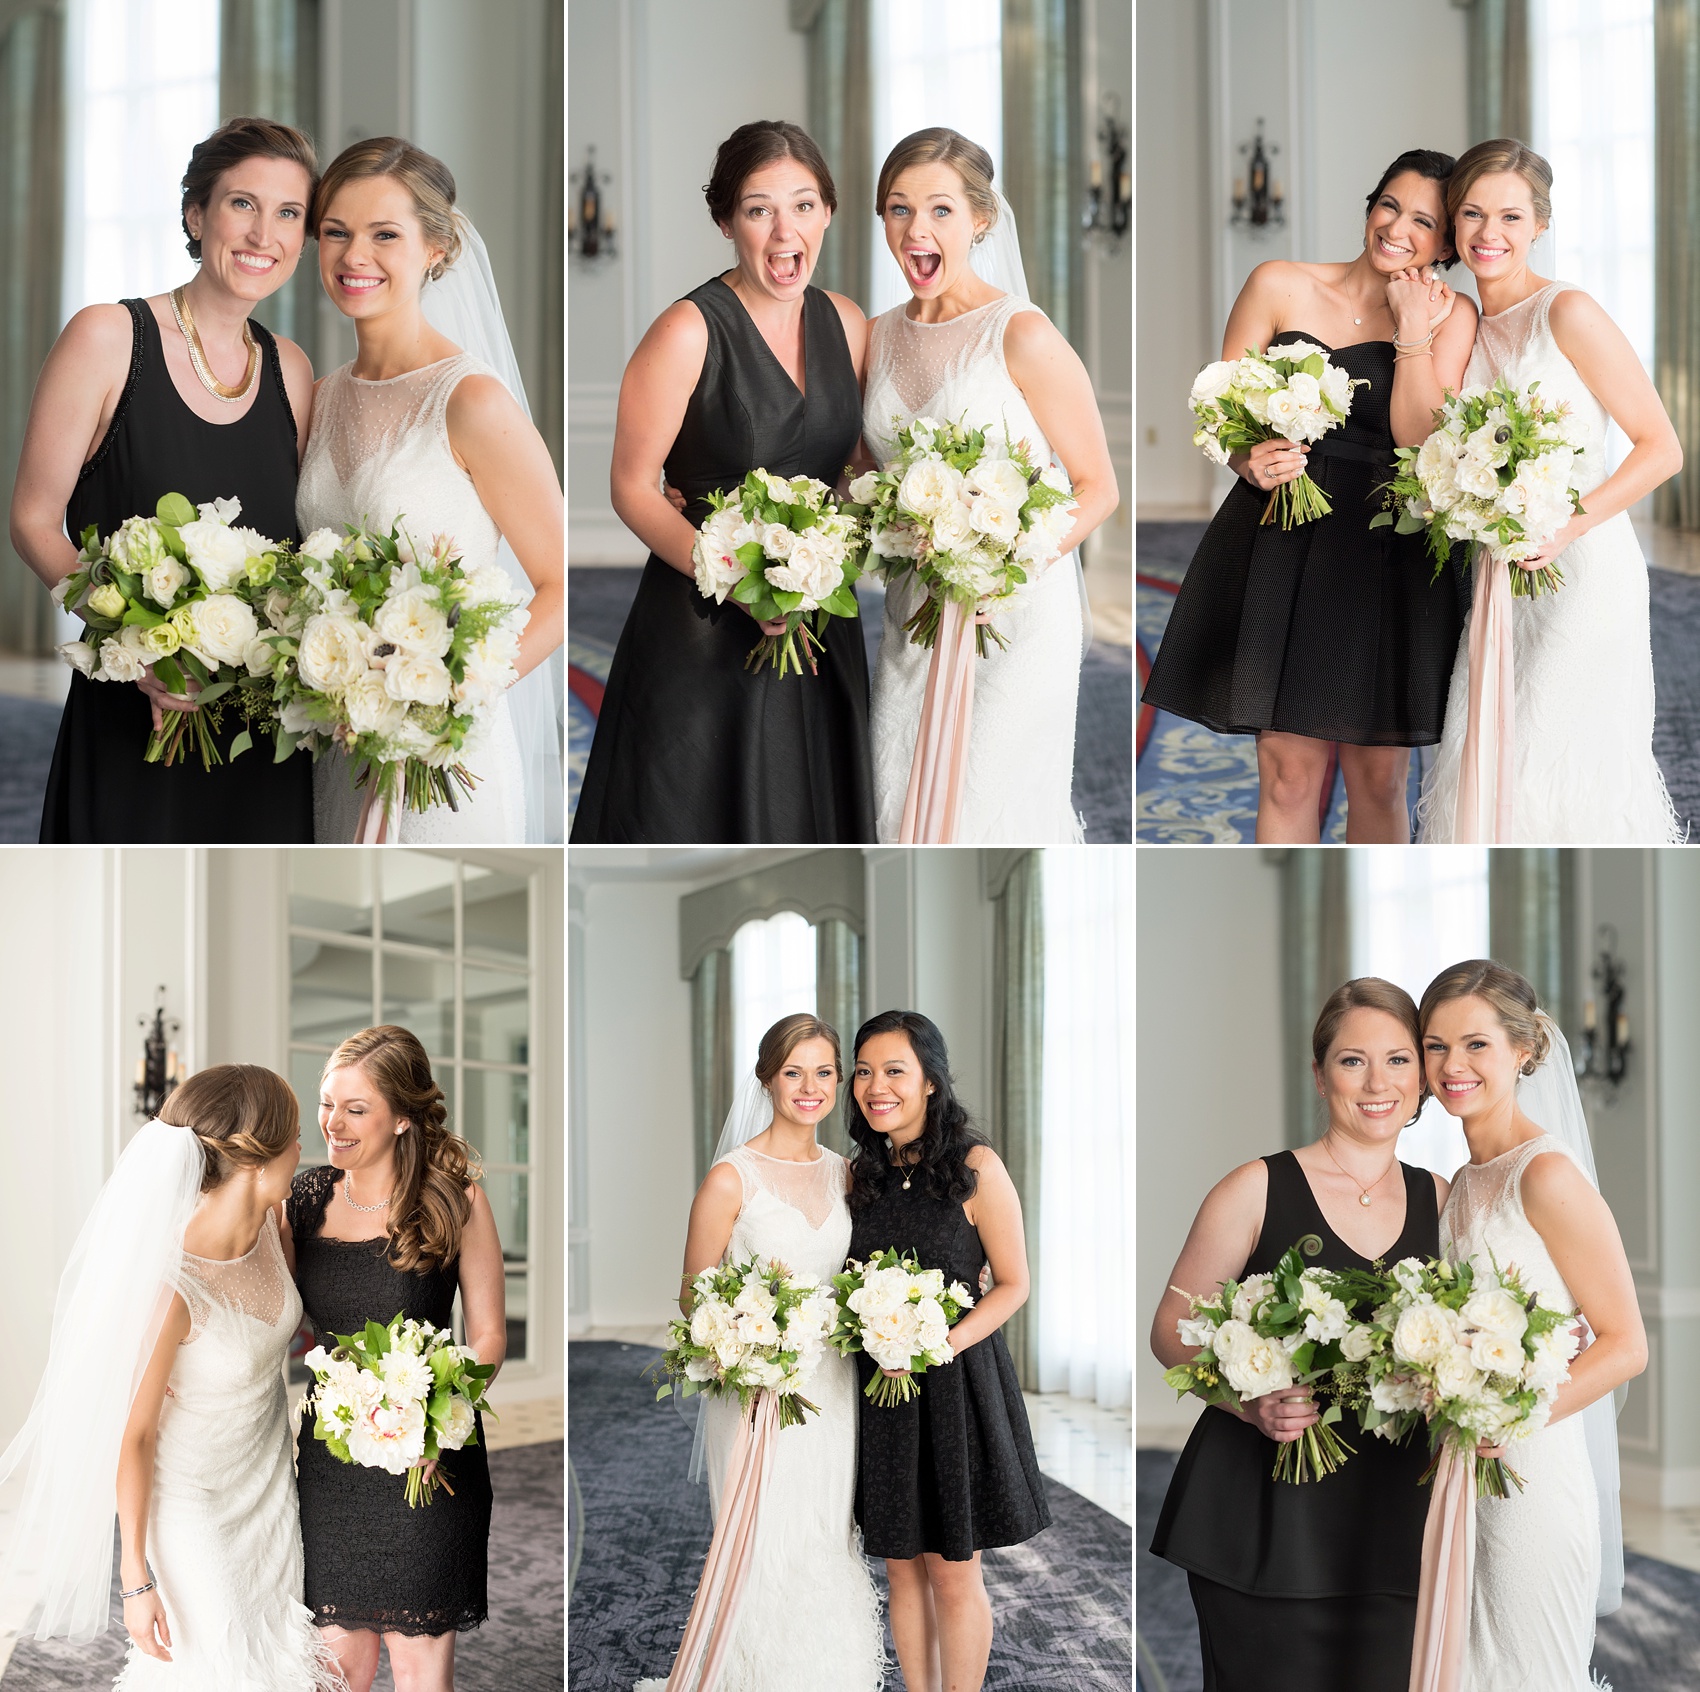 Pearl River Hilton wedding photos with silly bridesmaids in black and white. Images by Mikkel Paige Photography, NYC wedding photographer.